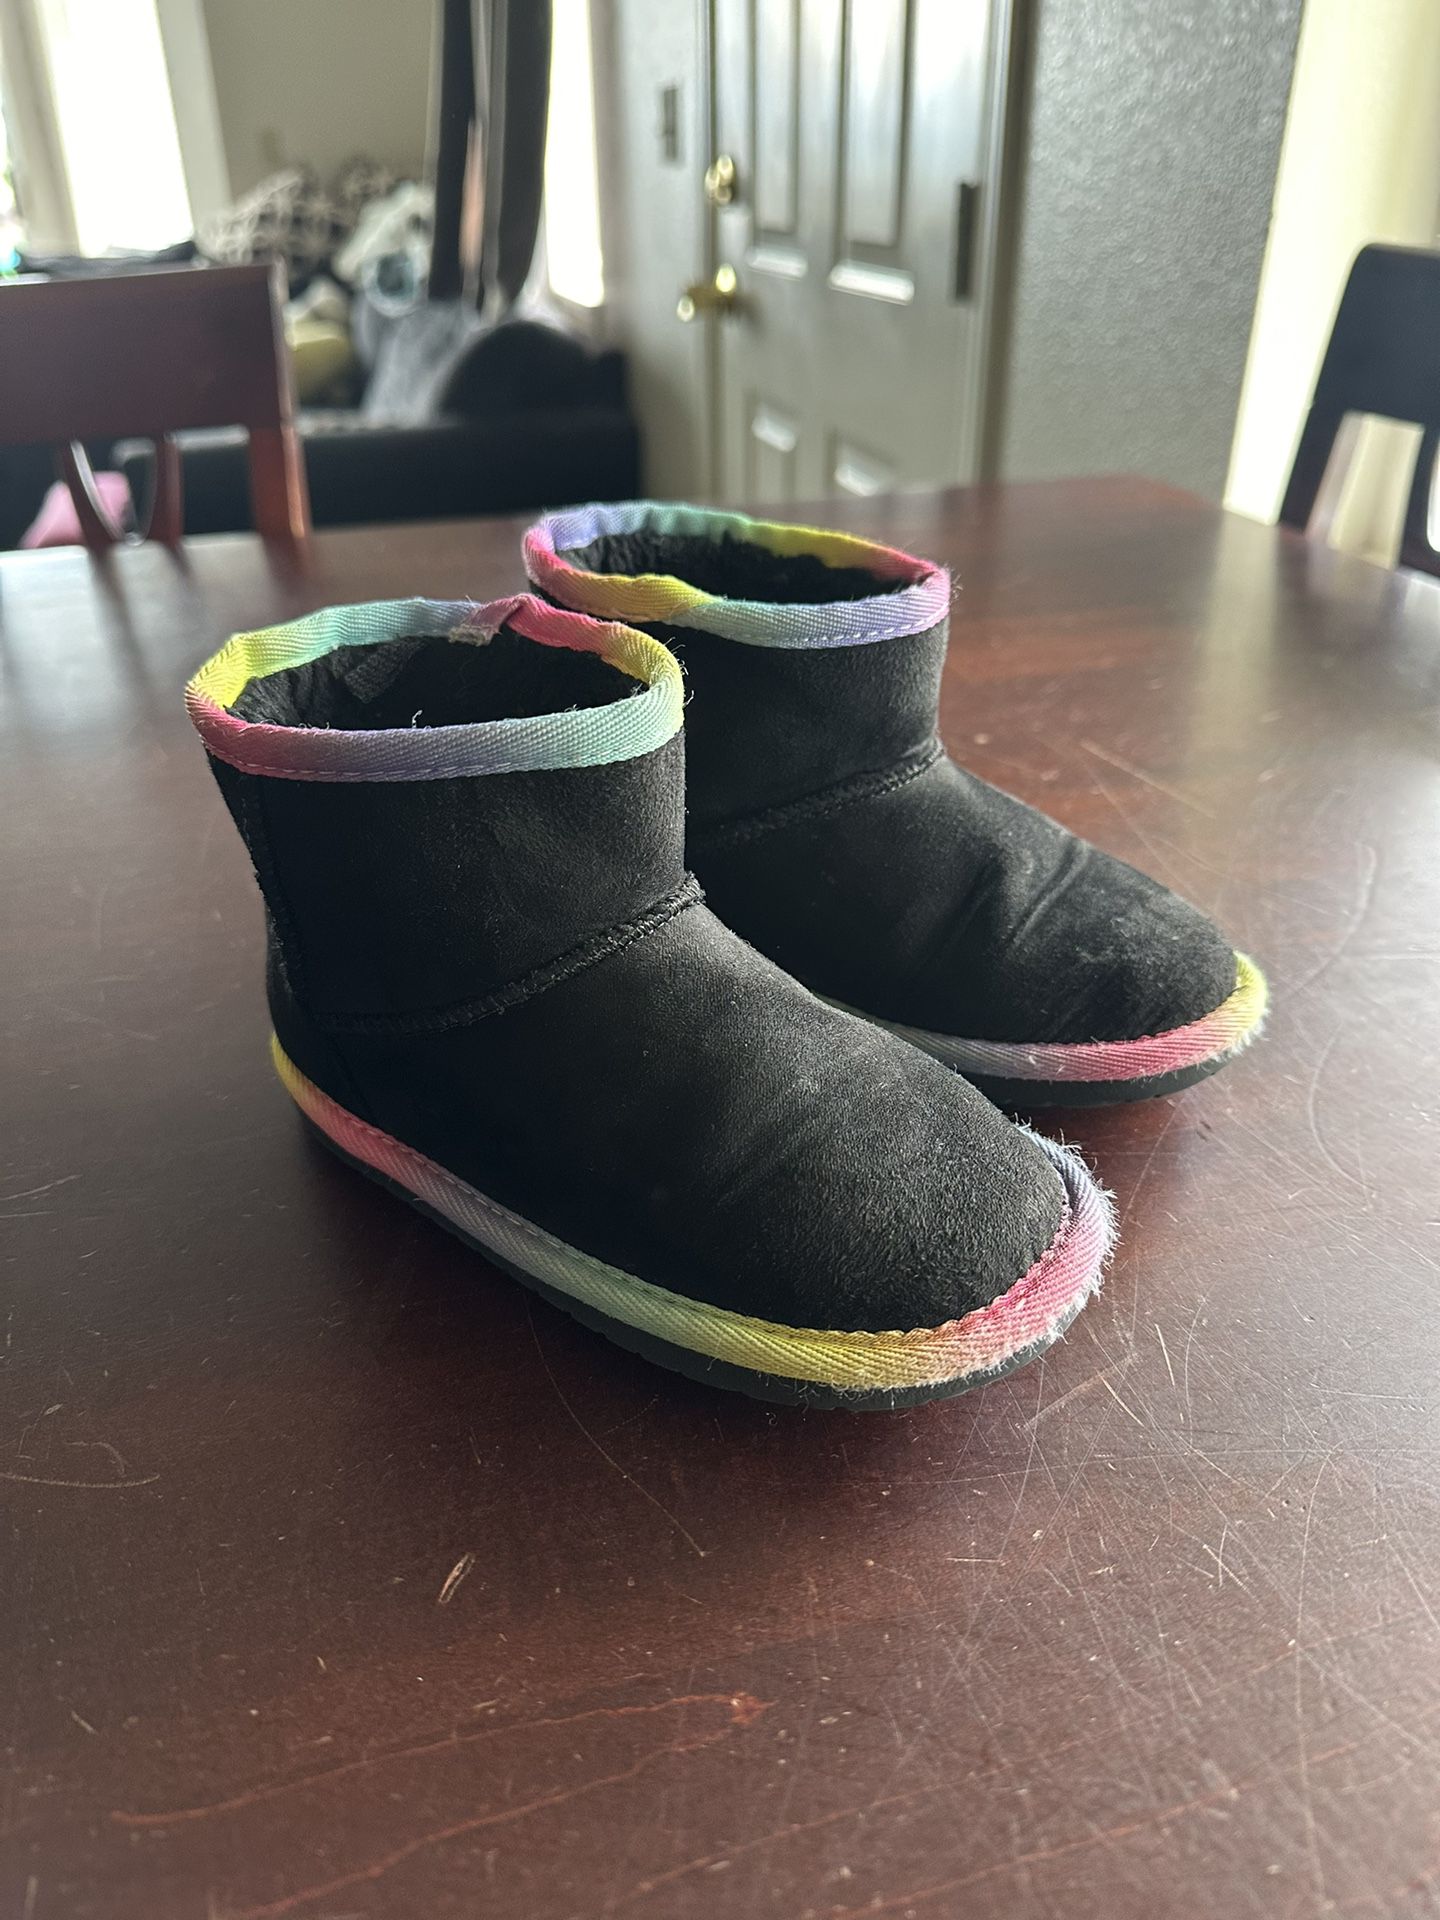 Toddler Girl Children’s Place Black Rainbow Boots Size 9 